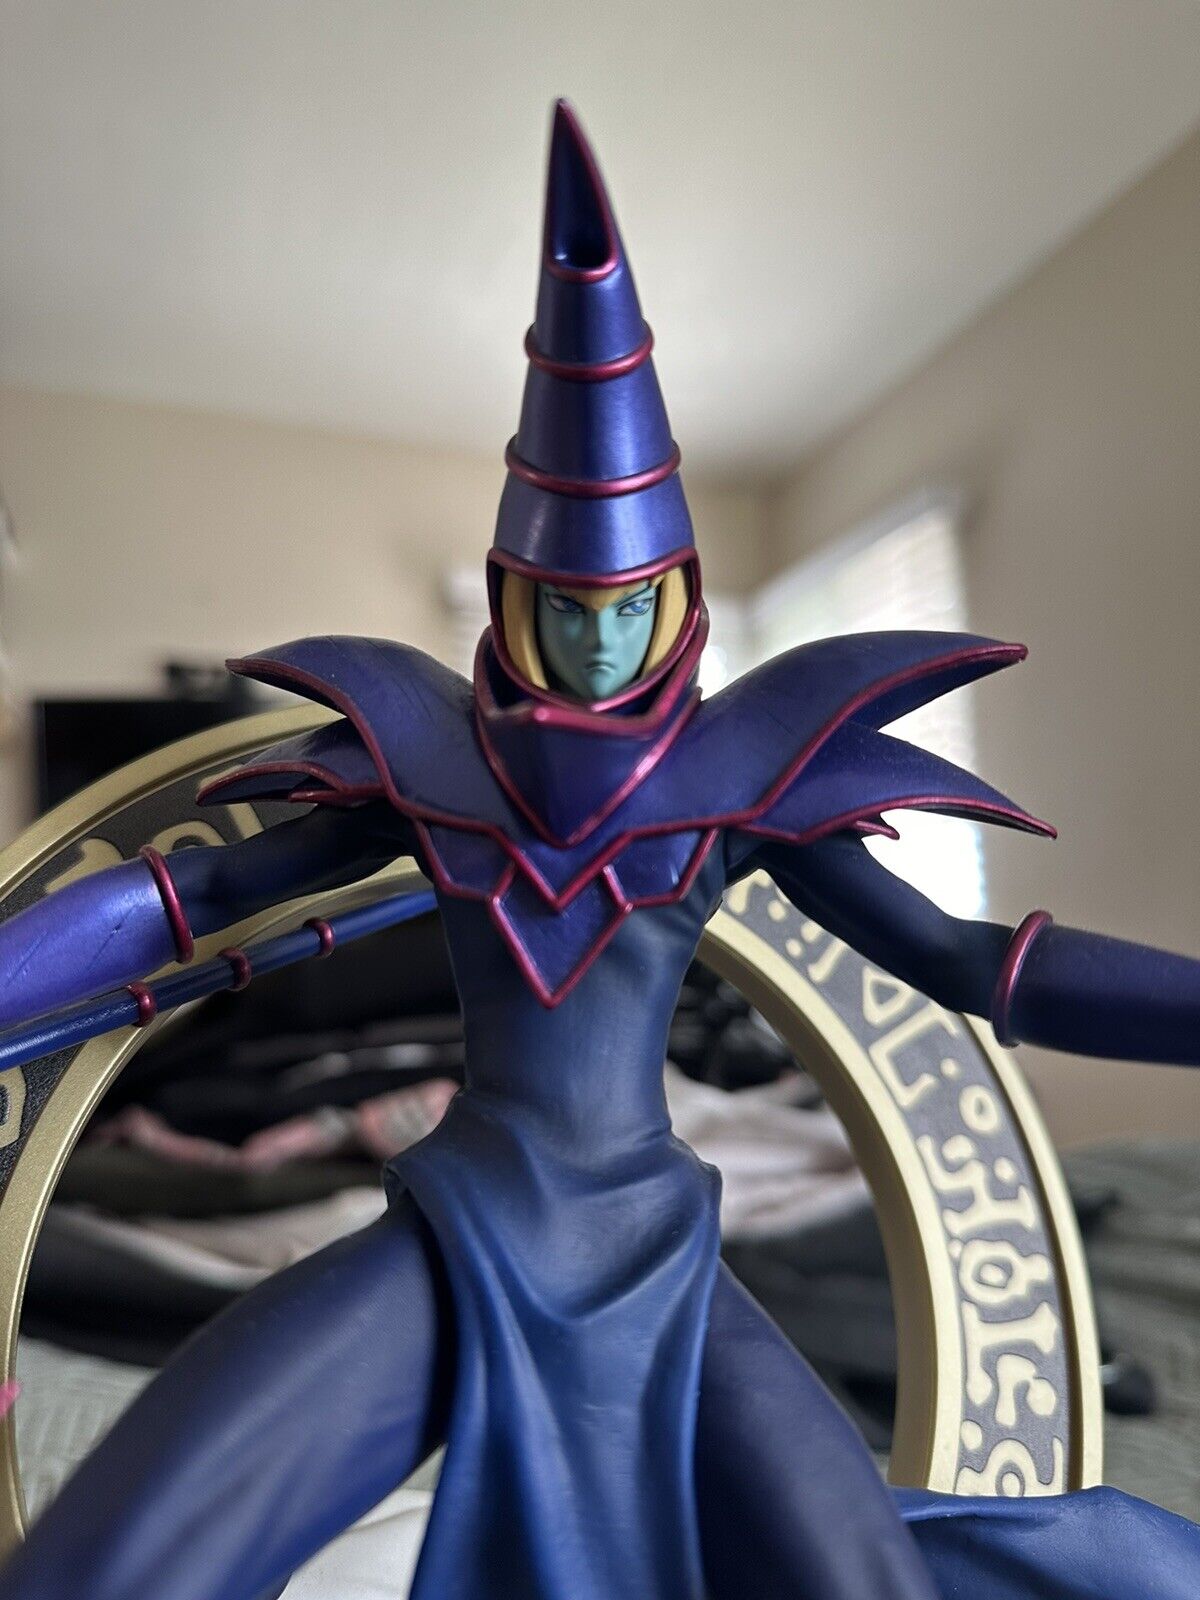 Yu-Gi-Oh Dark Magician PVC Statue (Blue Variant) - Comes With OG box